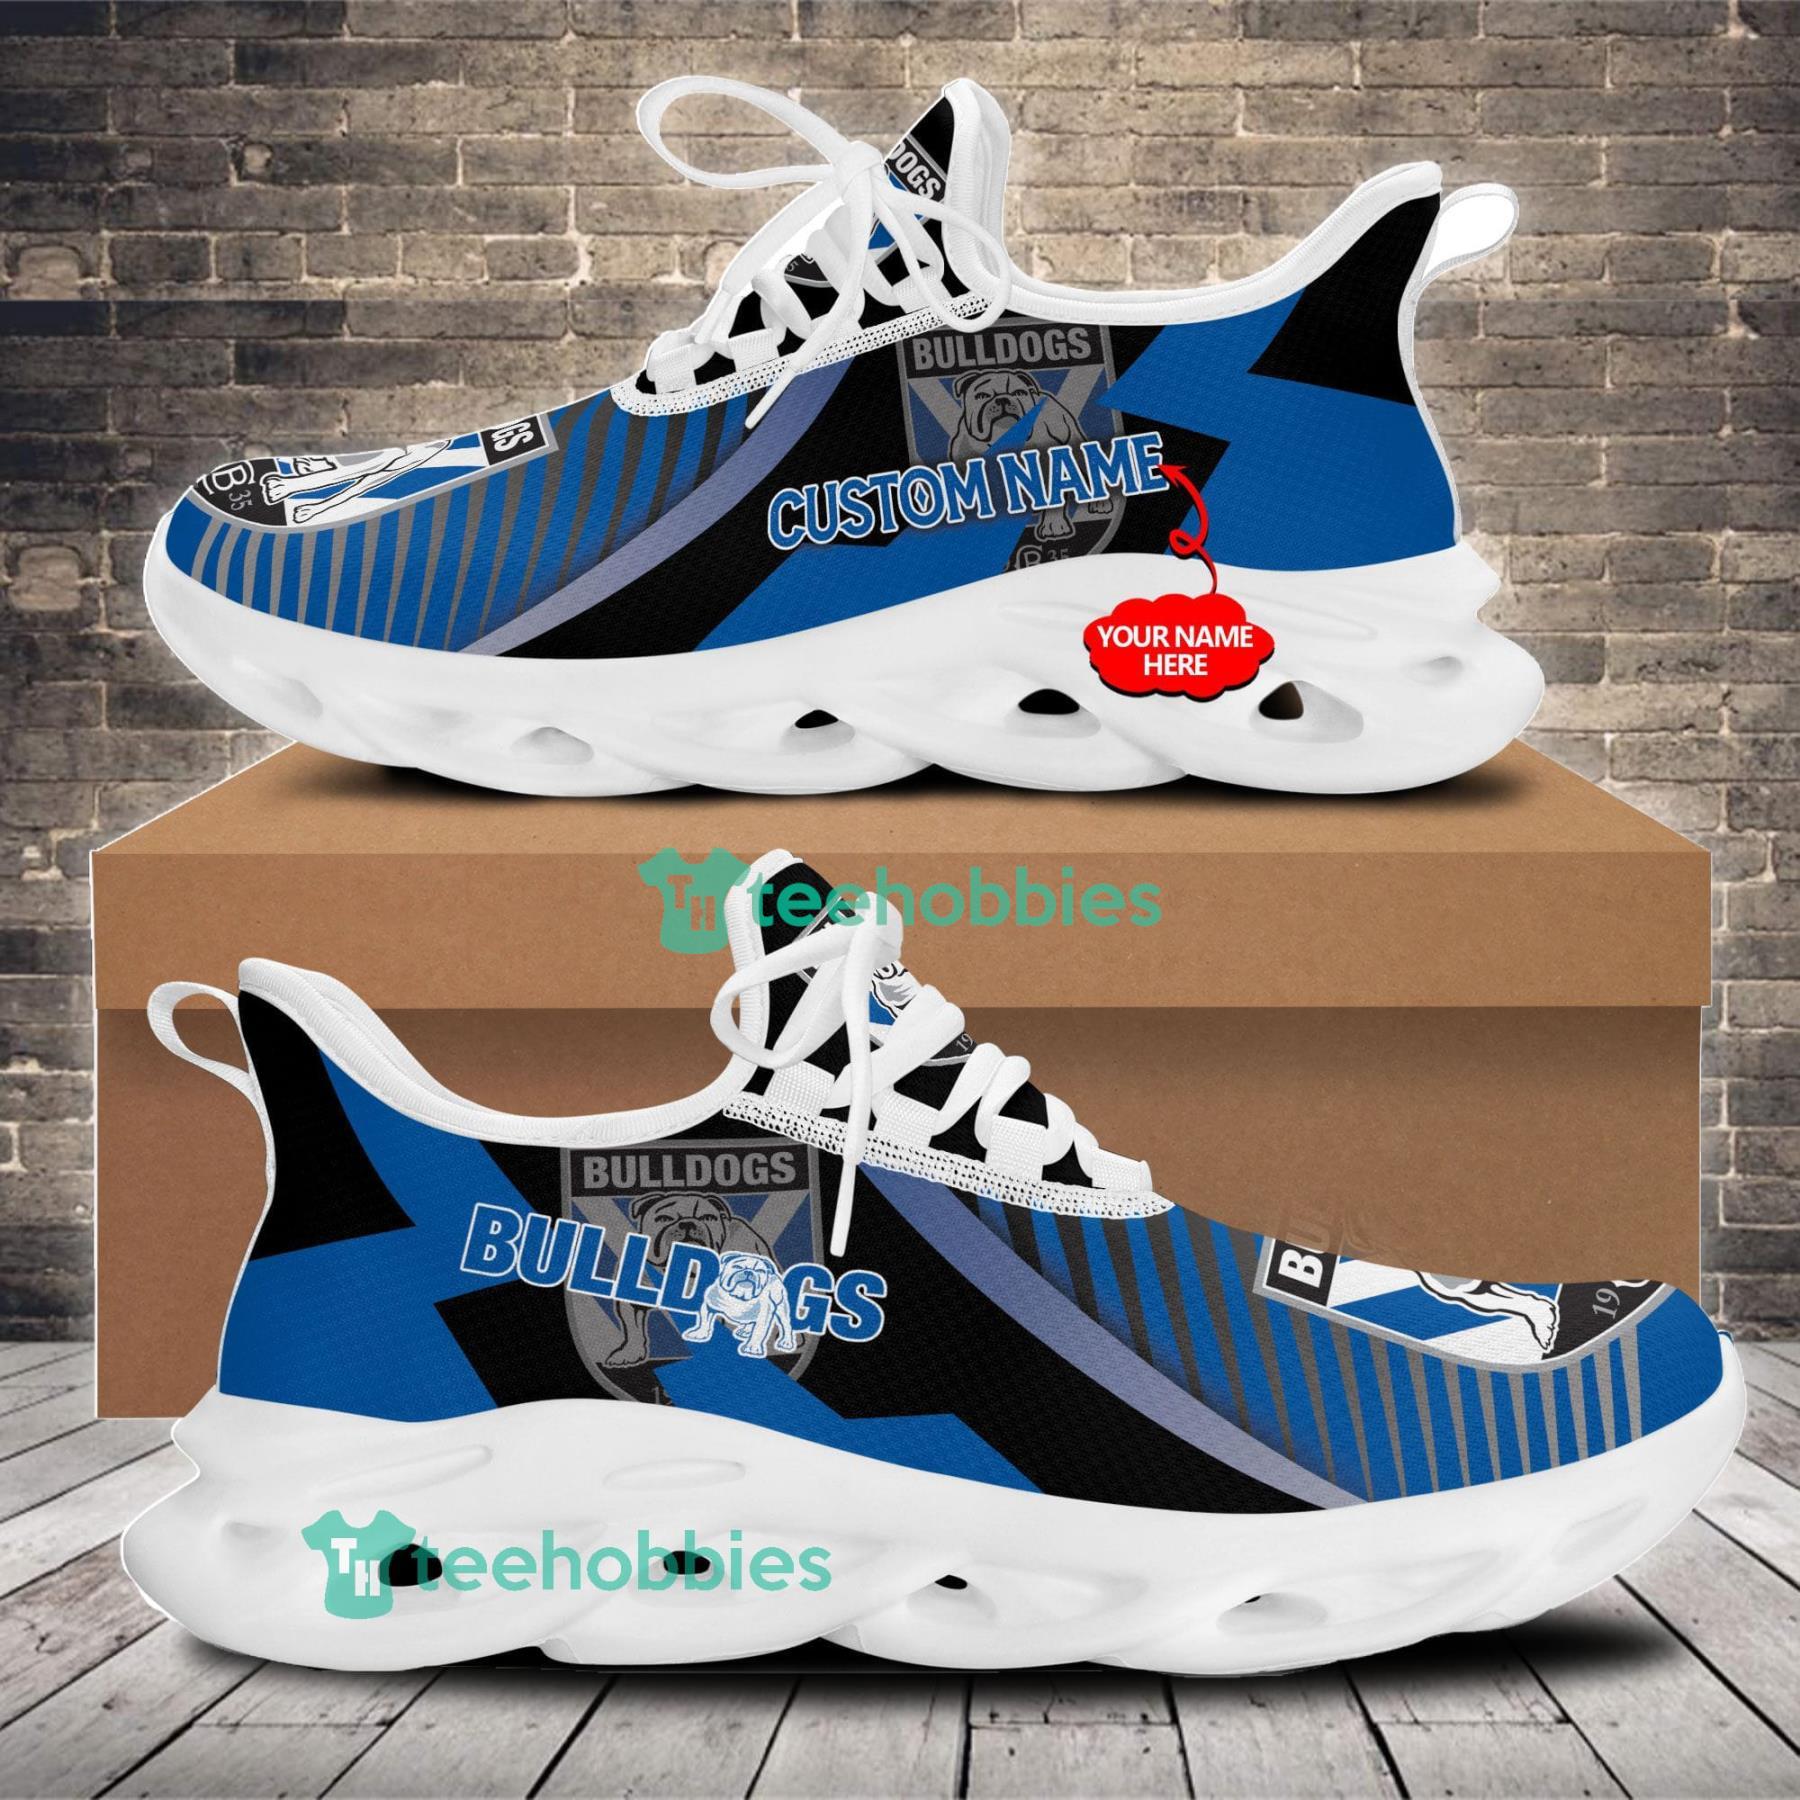 Canterbury-Bankstown Bulldogs Sport Team Personalized Name Sneakers Max Soul Shoes For Men And Women Product Photo 1